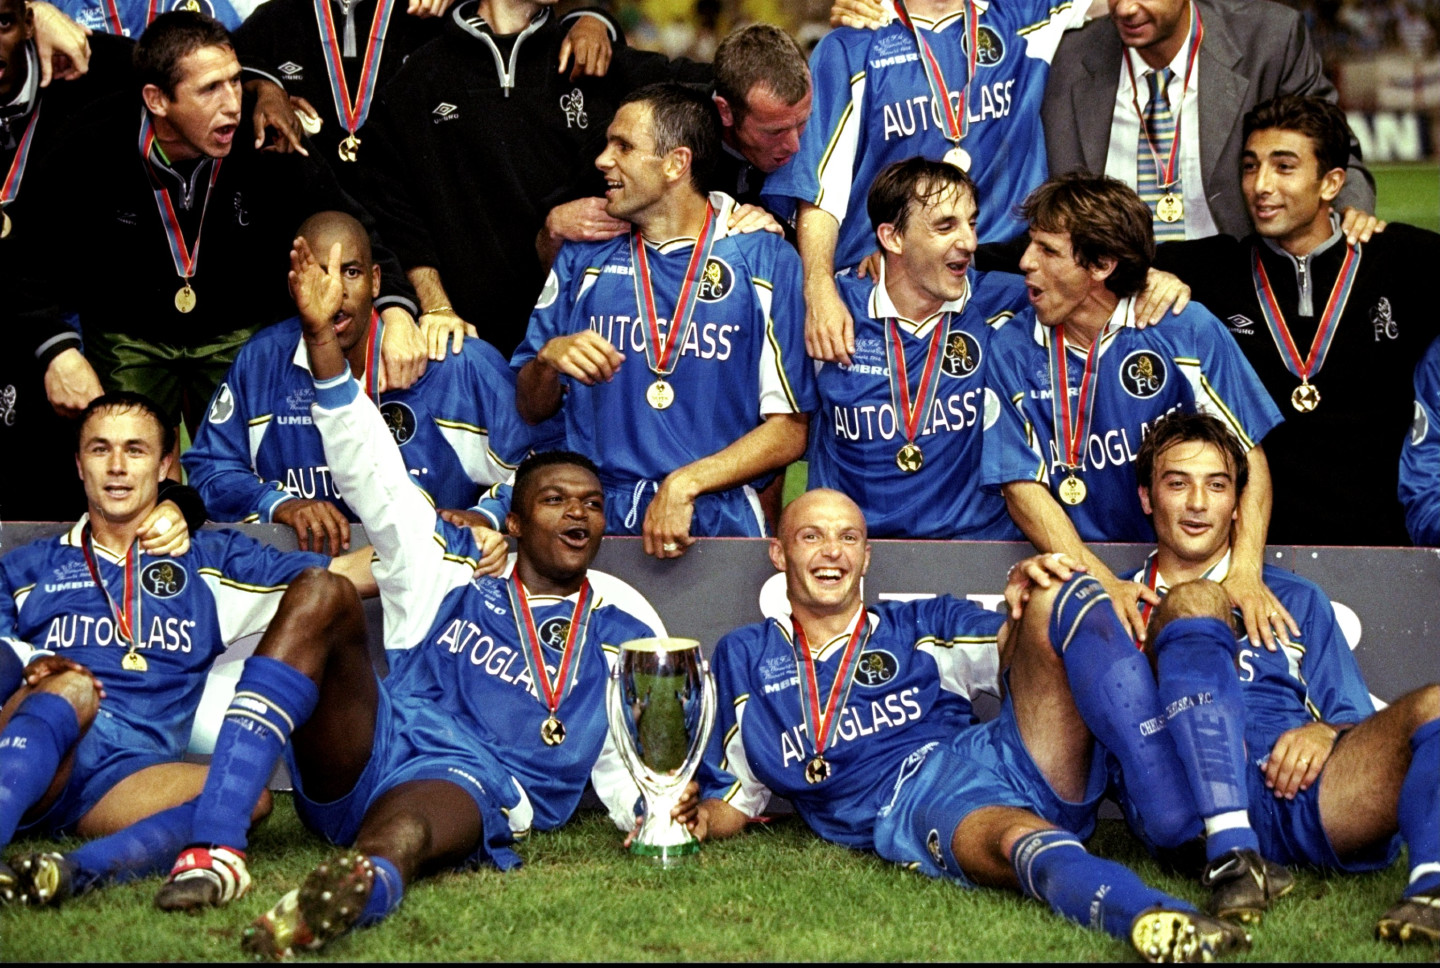 https://img.chelseafc.com/image/upload/f_auto,w_1440,c_fill,g_faces,q_90/editorial/news/2021/08/08/1998-Super-Cup-GettyImages-1272763.jpg